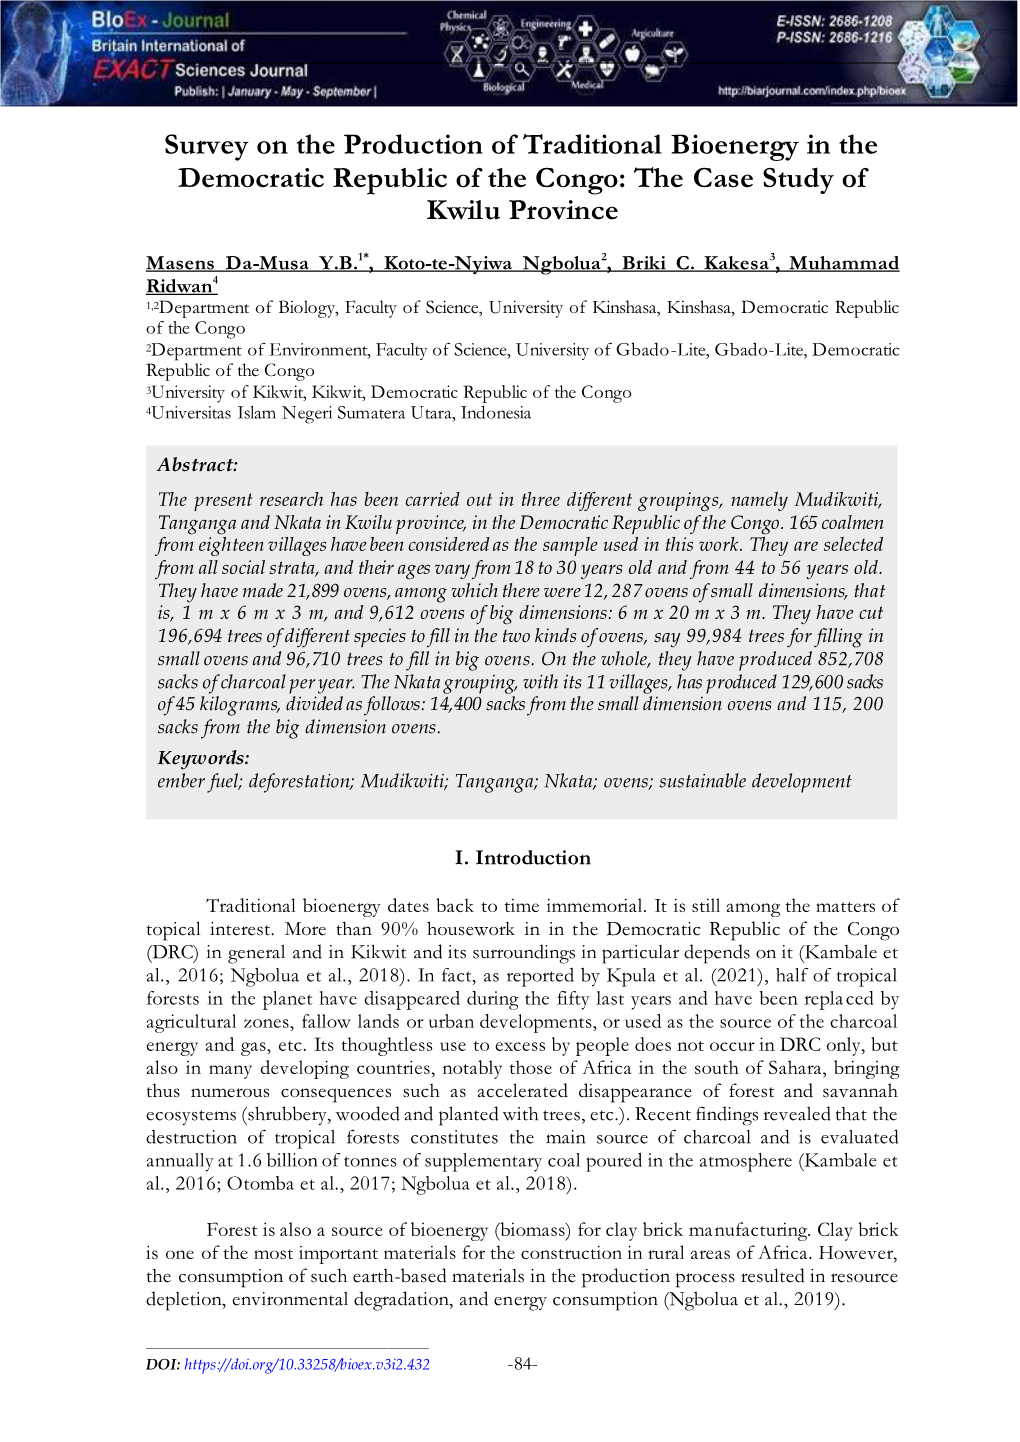 Survey on the Production of Traditional Bioenergy in the Democratic Republic of the Congo: the Case Study of Kwilu Province